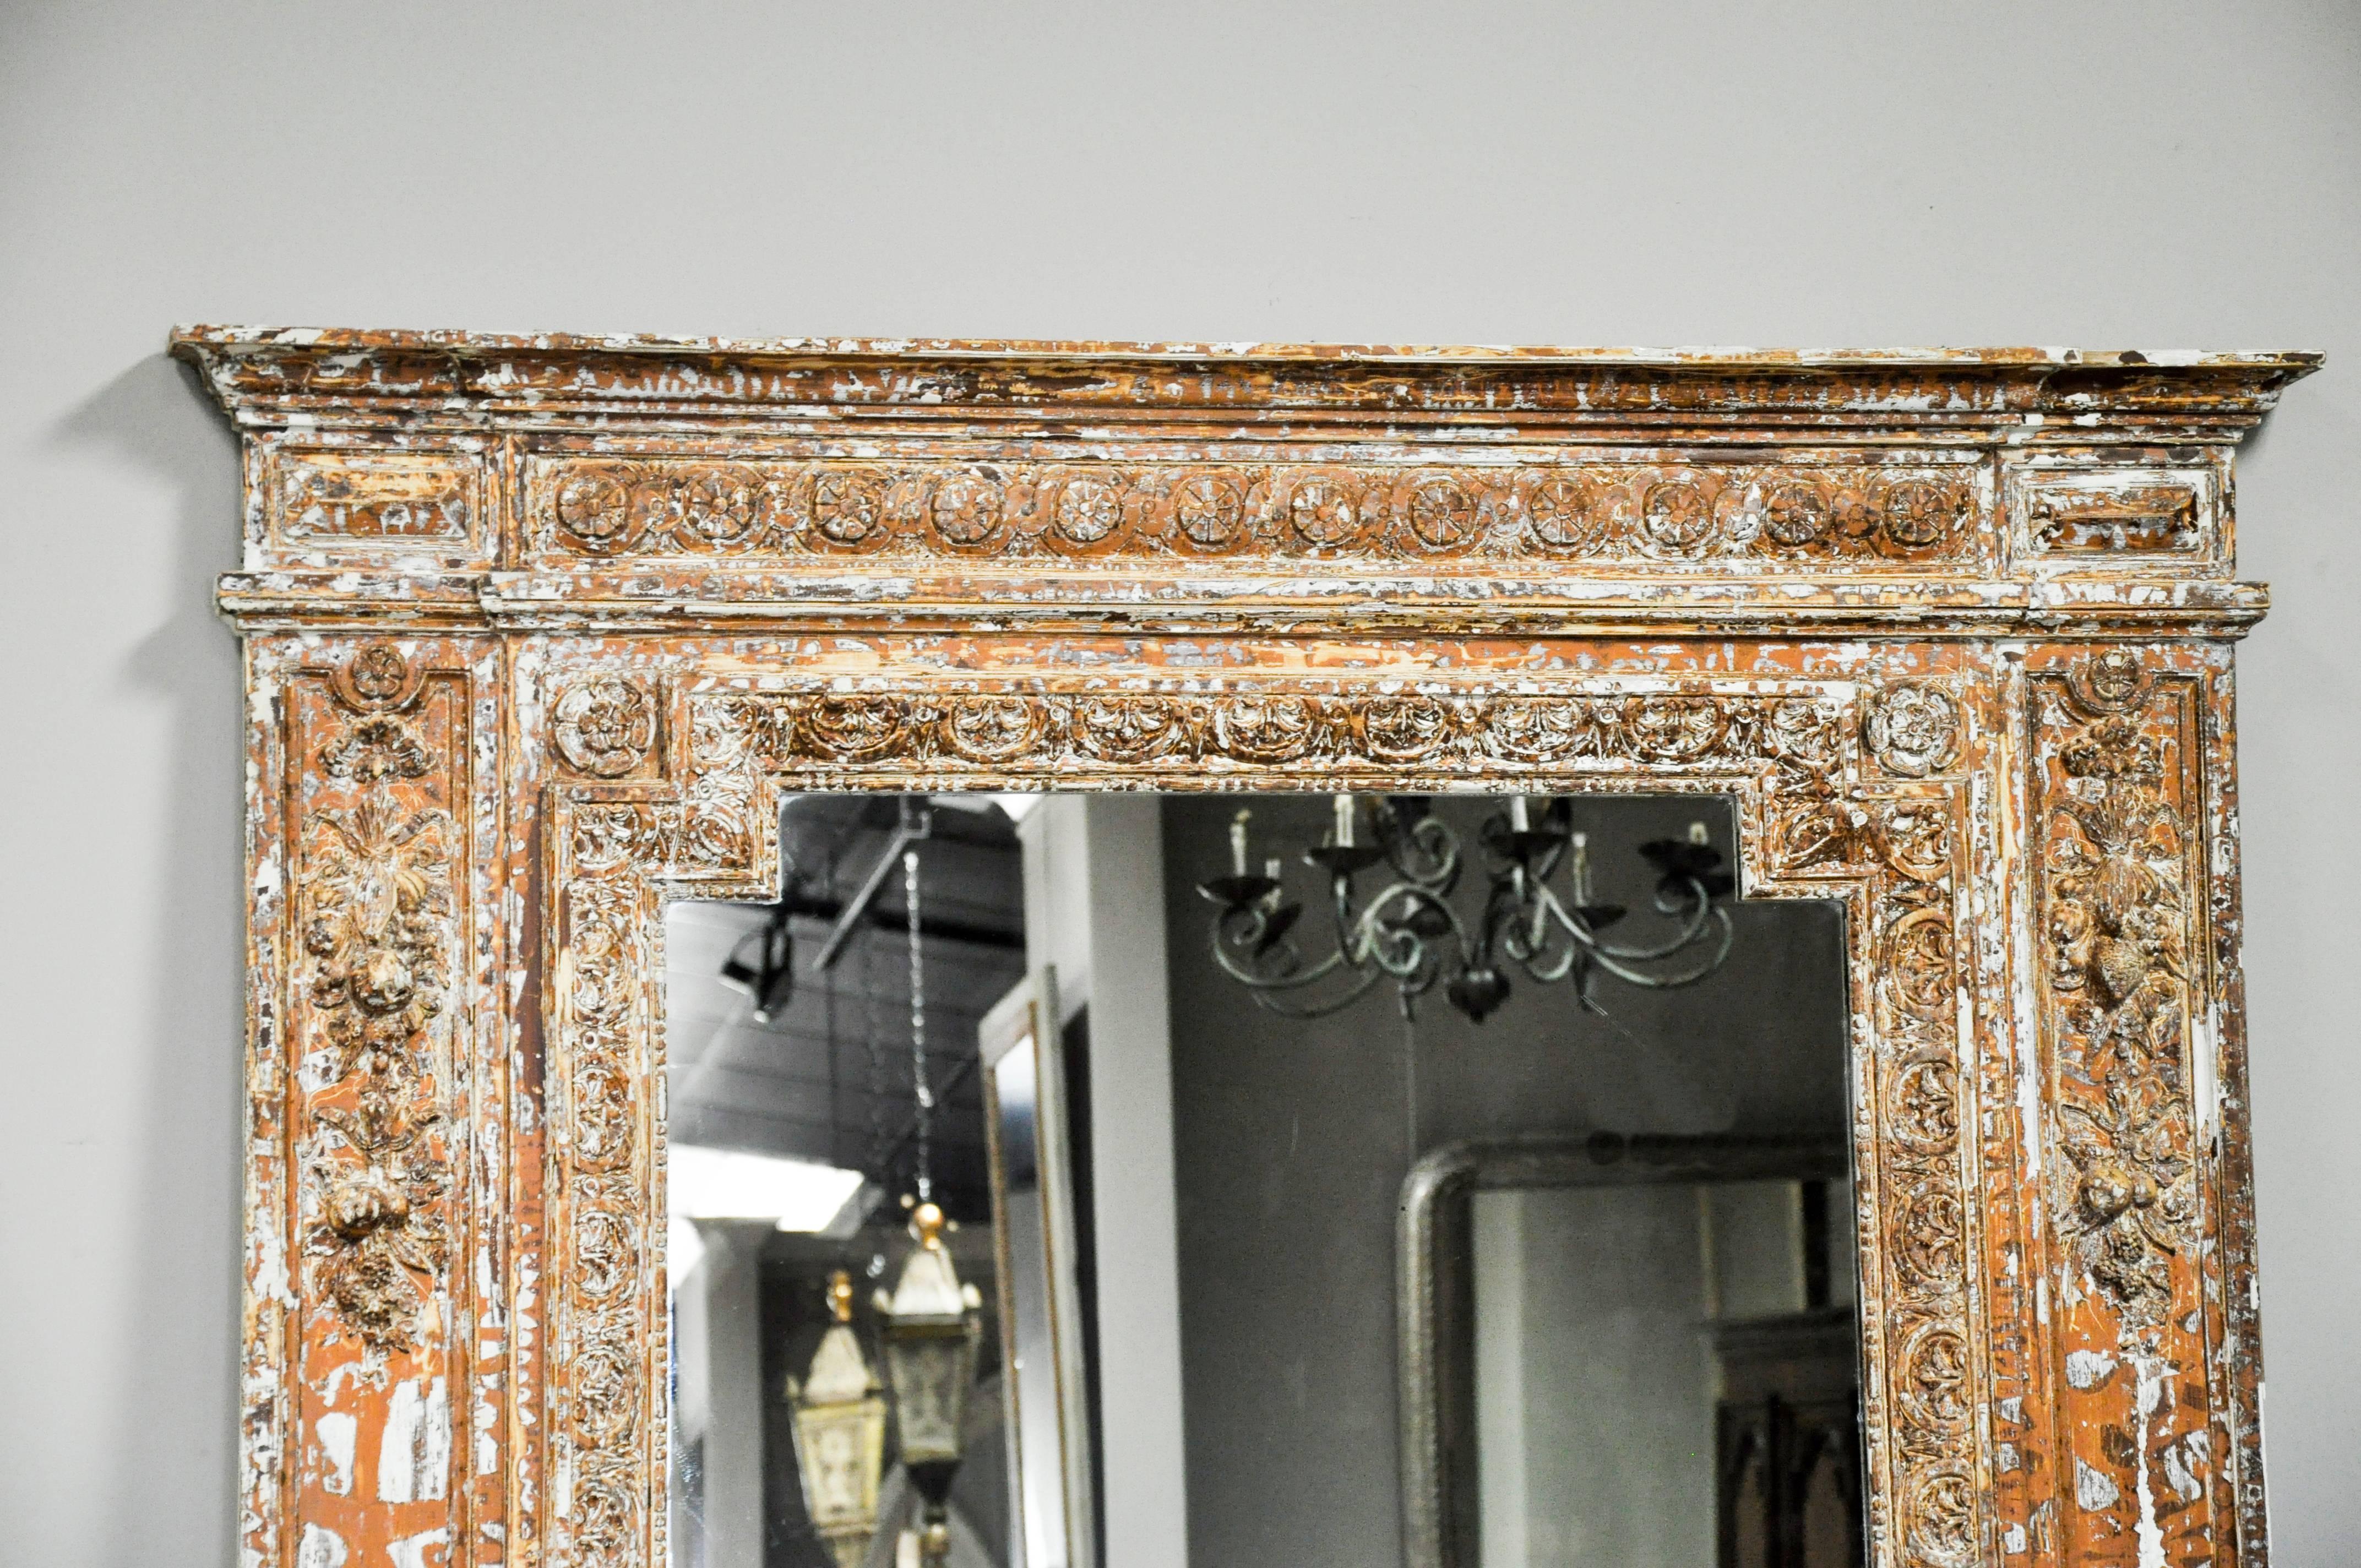 Hand-Carved 19th Century French Carved Wood Mirror with Stripped Paint Finish